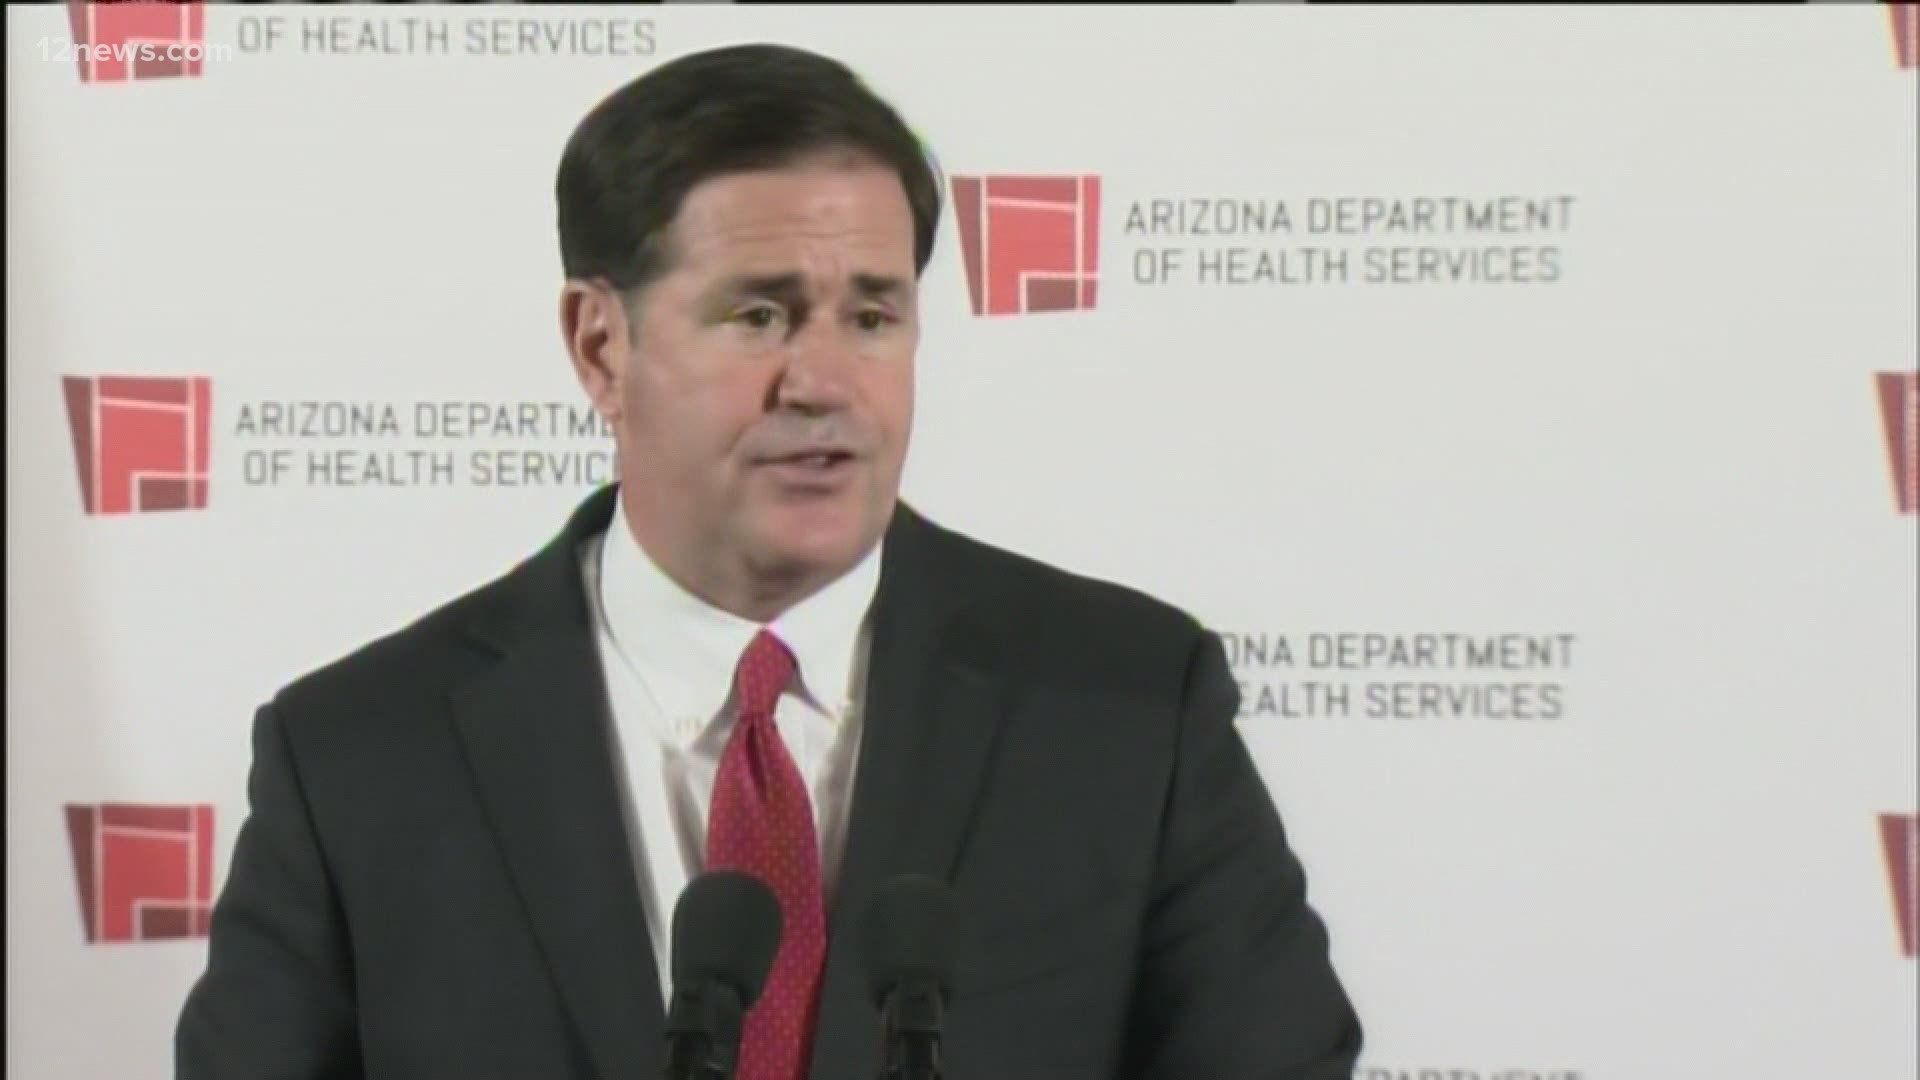 With COVID-19 cases surging in Arizona, Governor Doug Ducey held his first news conference in weeks. He avoided issuing a state-wise mask mandate.